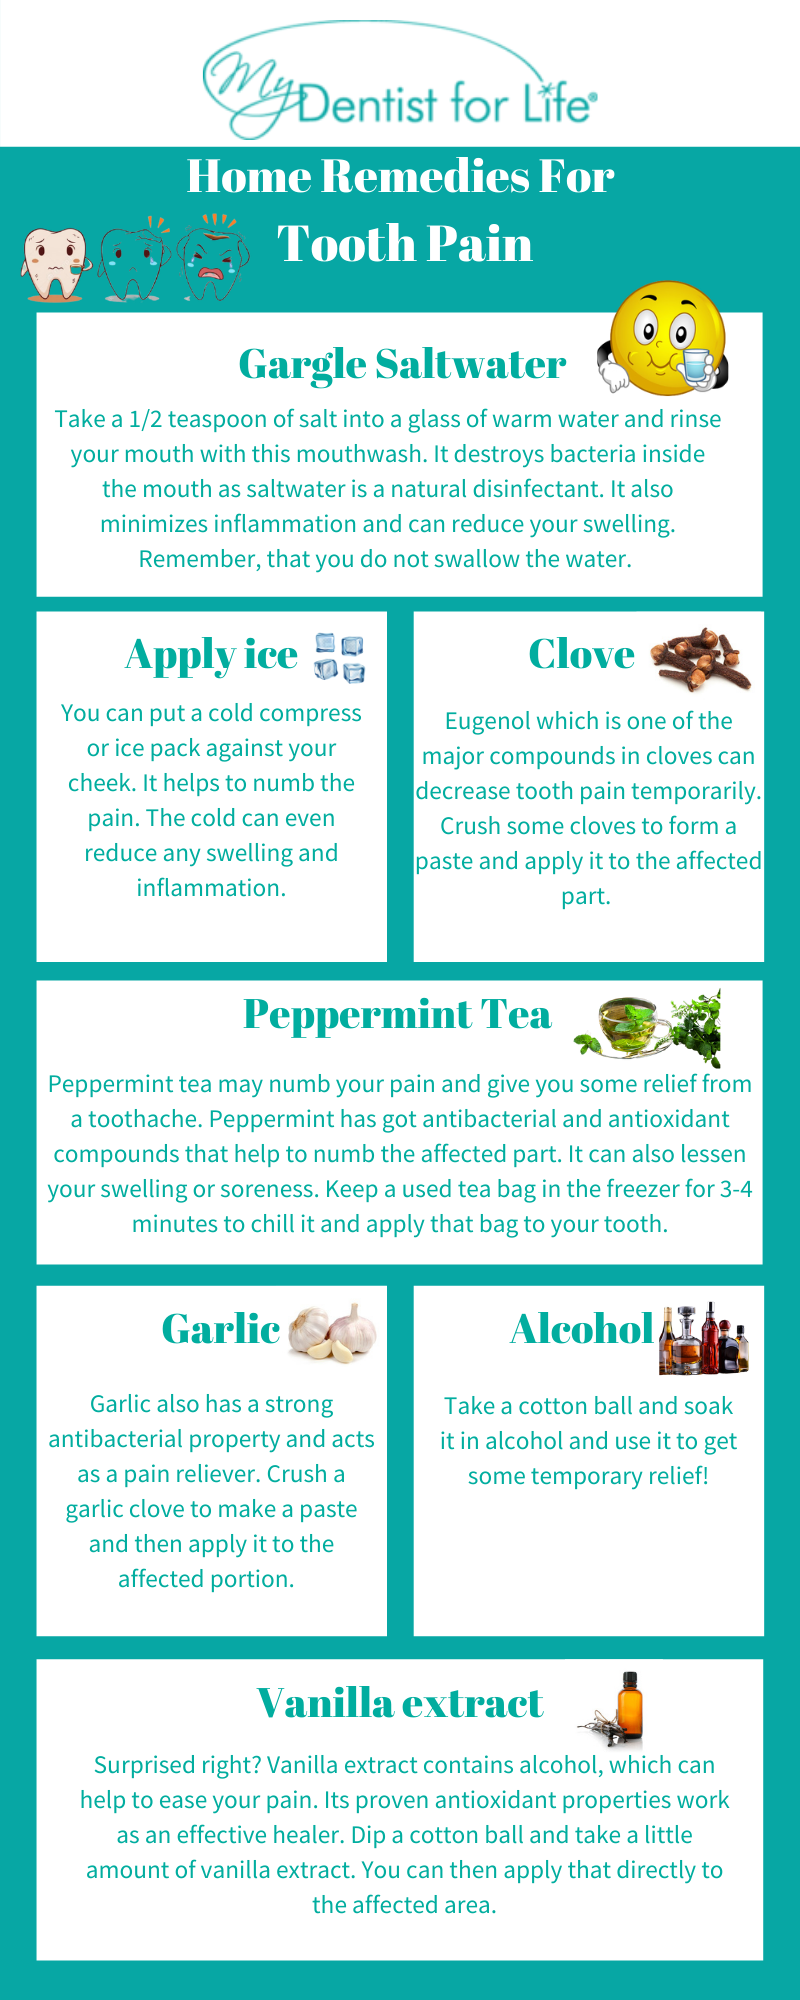 How To Cope With Tooth Pain At Home? - My Dentist For Life - Medium